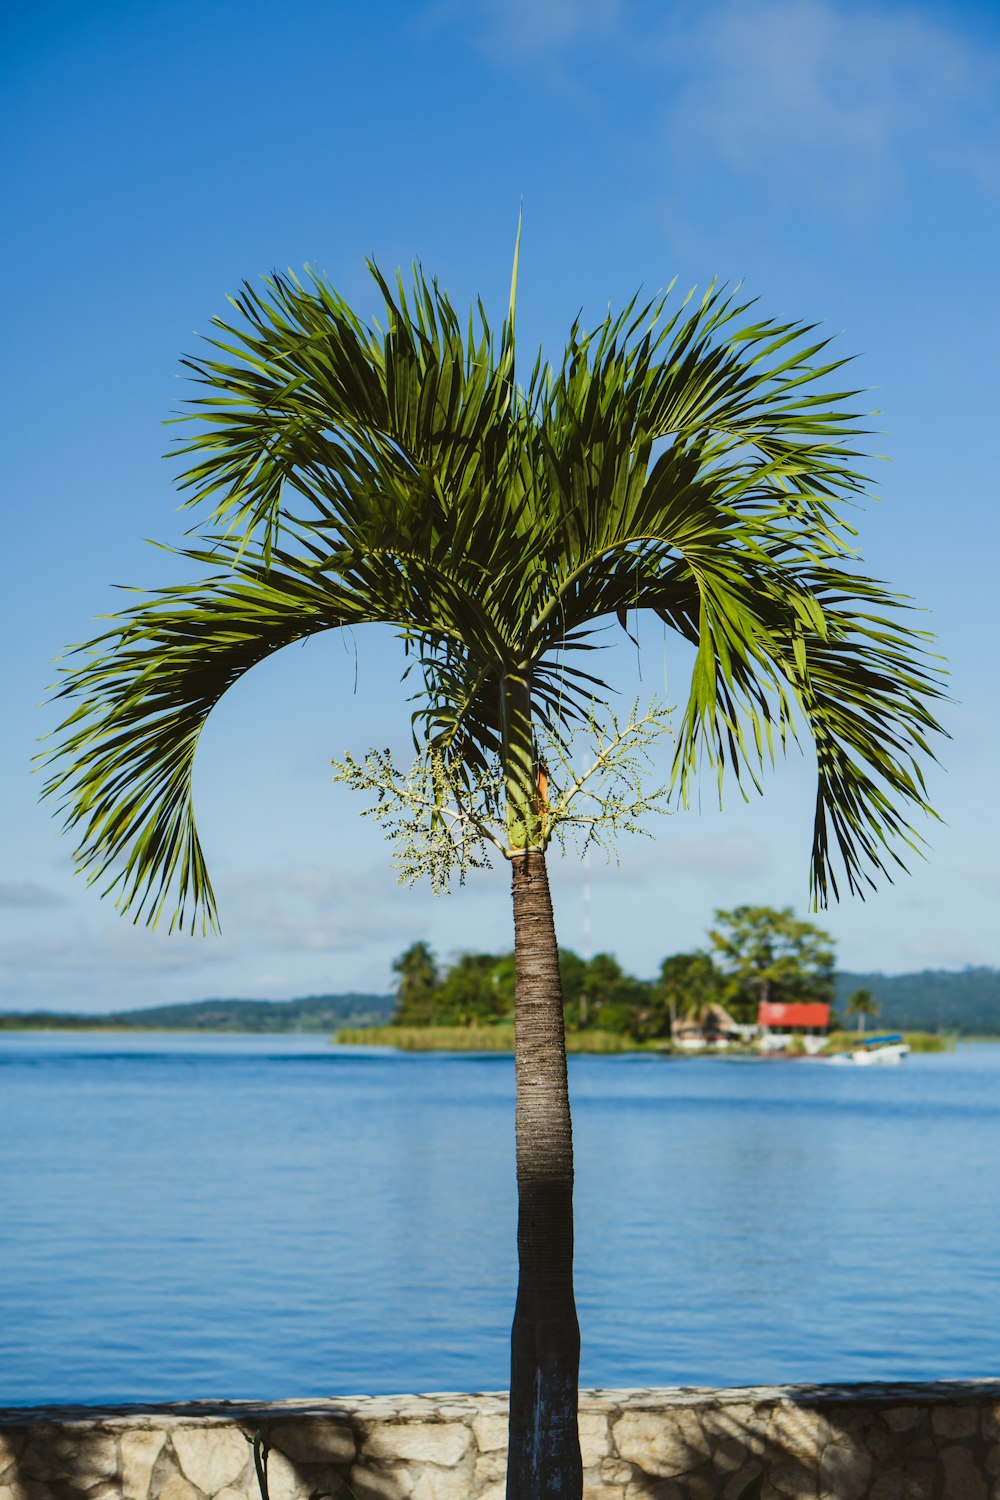 a palm tree in front of a body of water